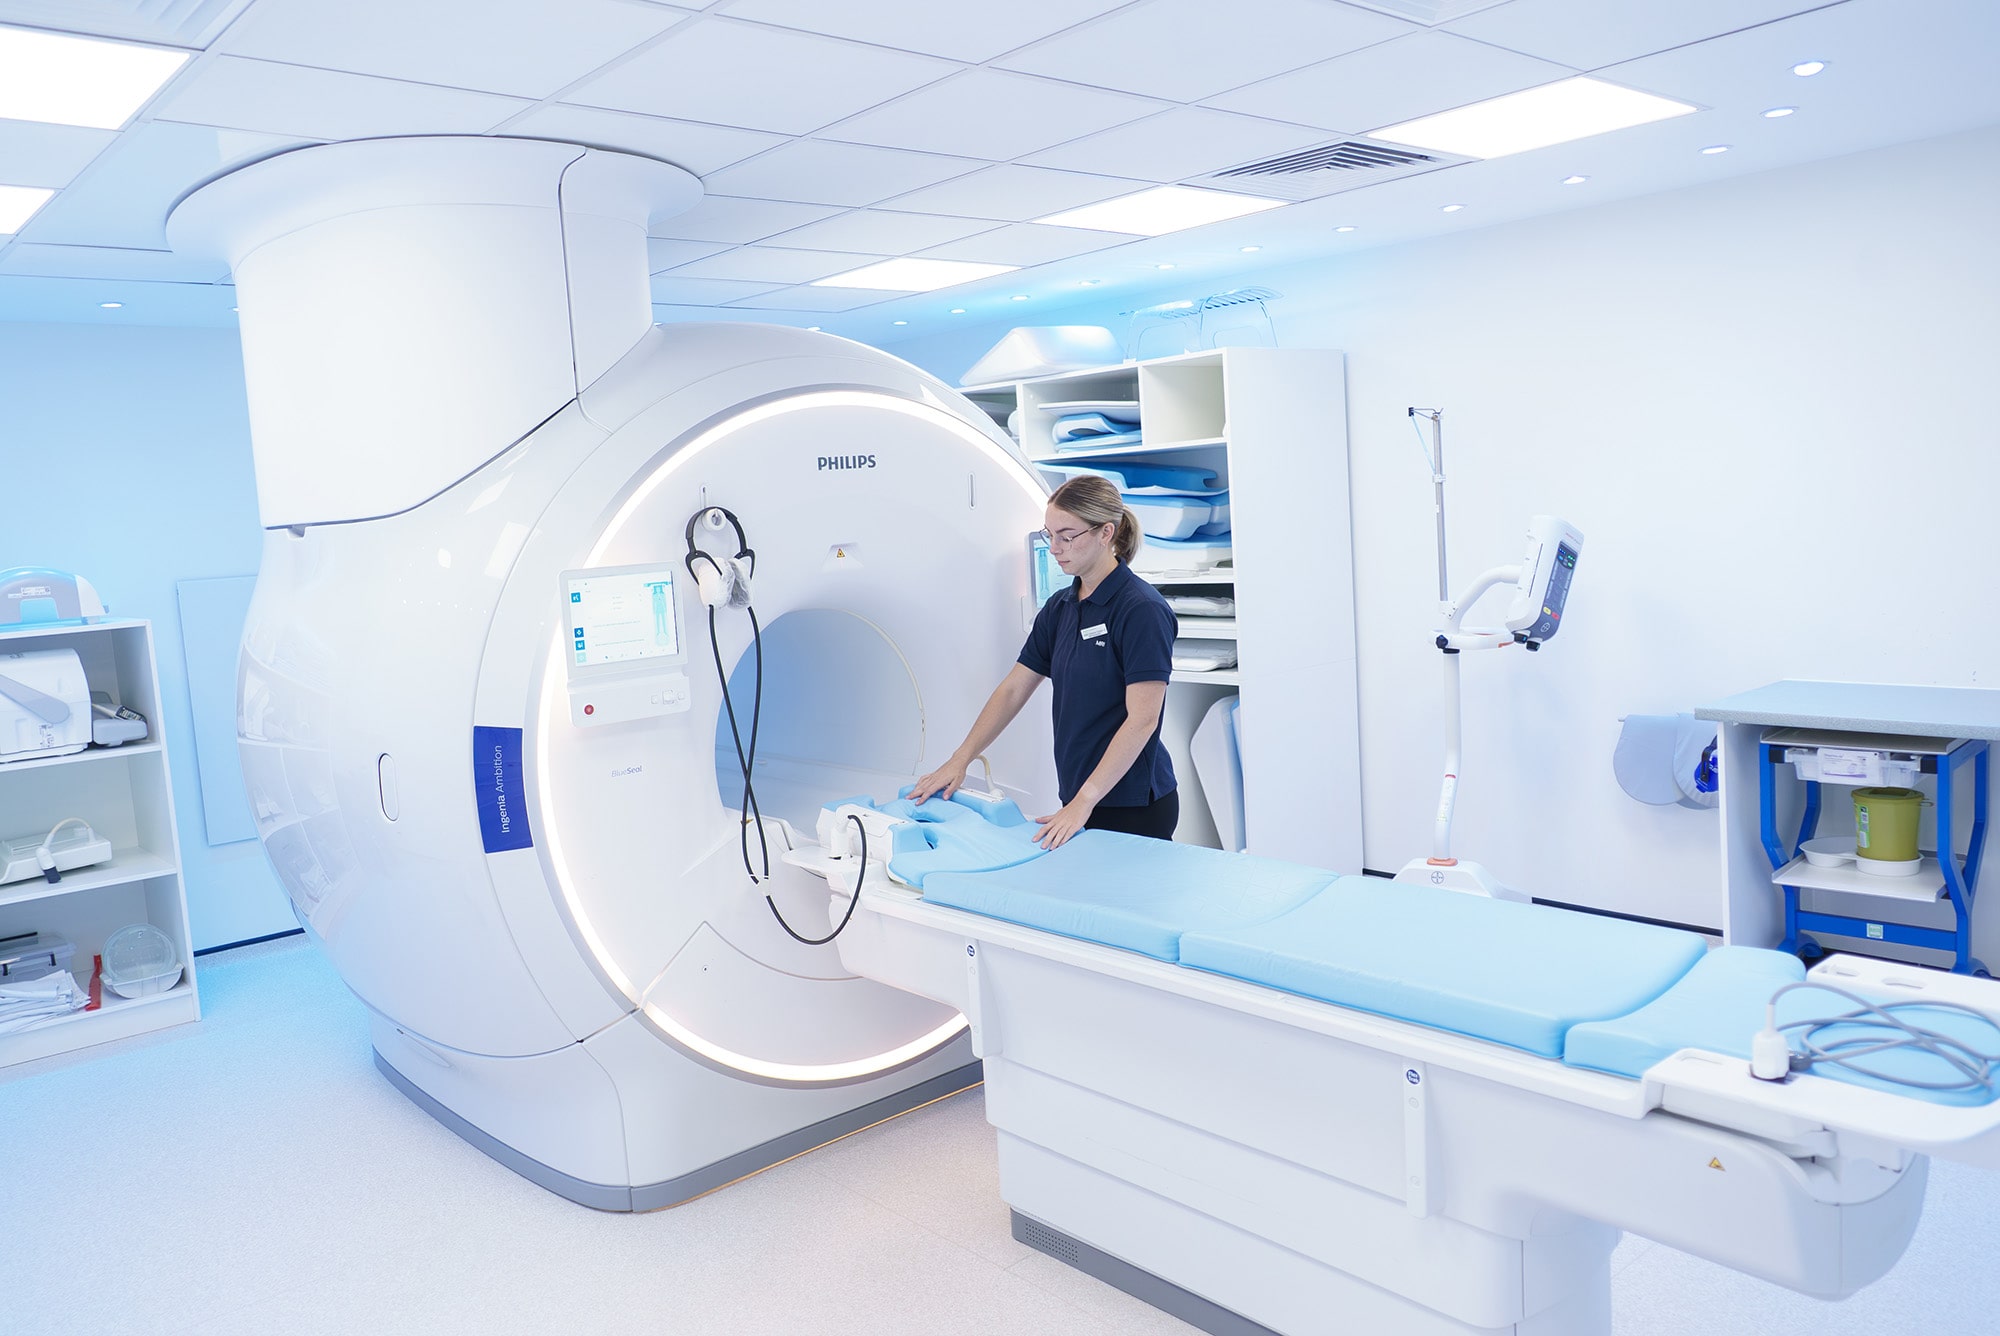 Radiographer in an MRI suite